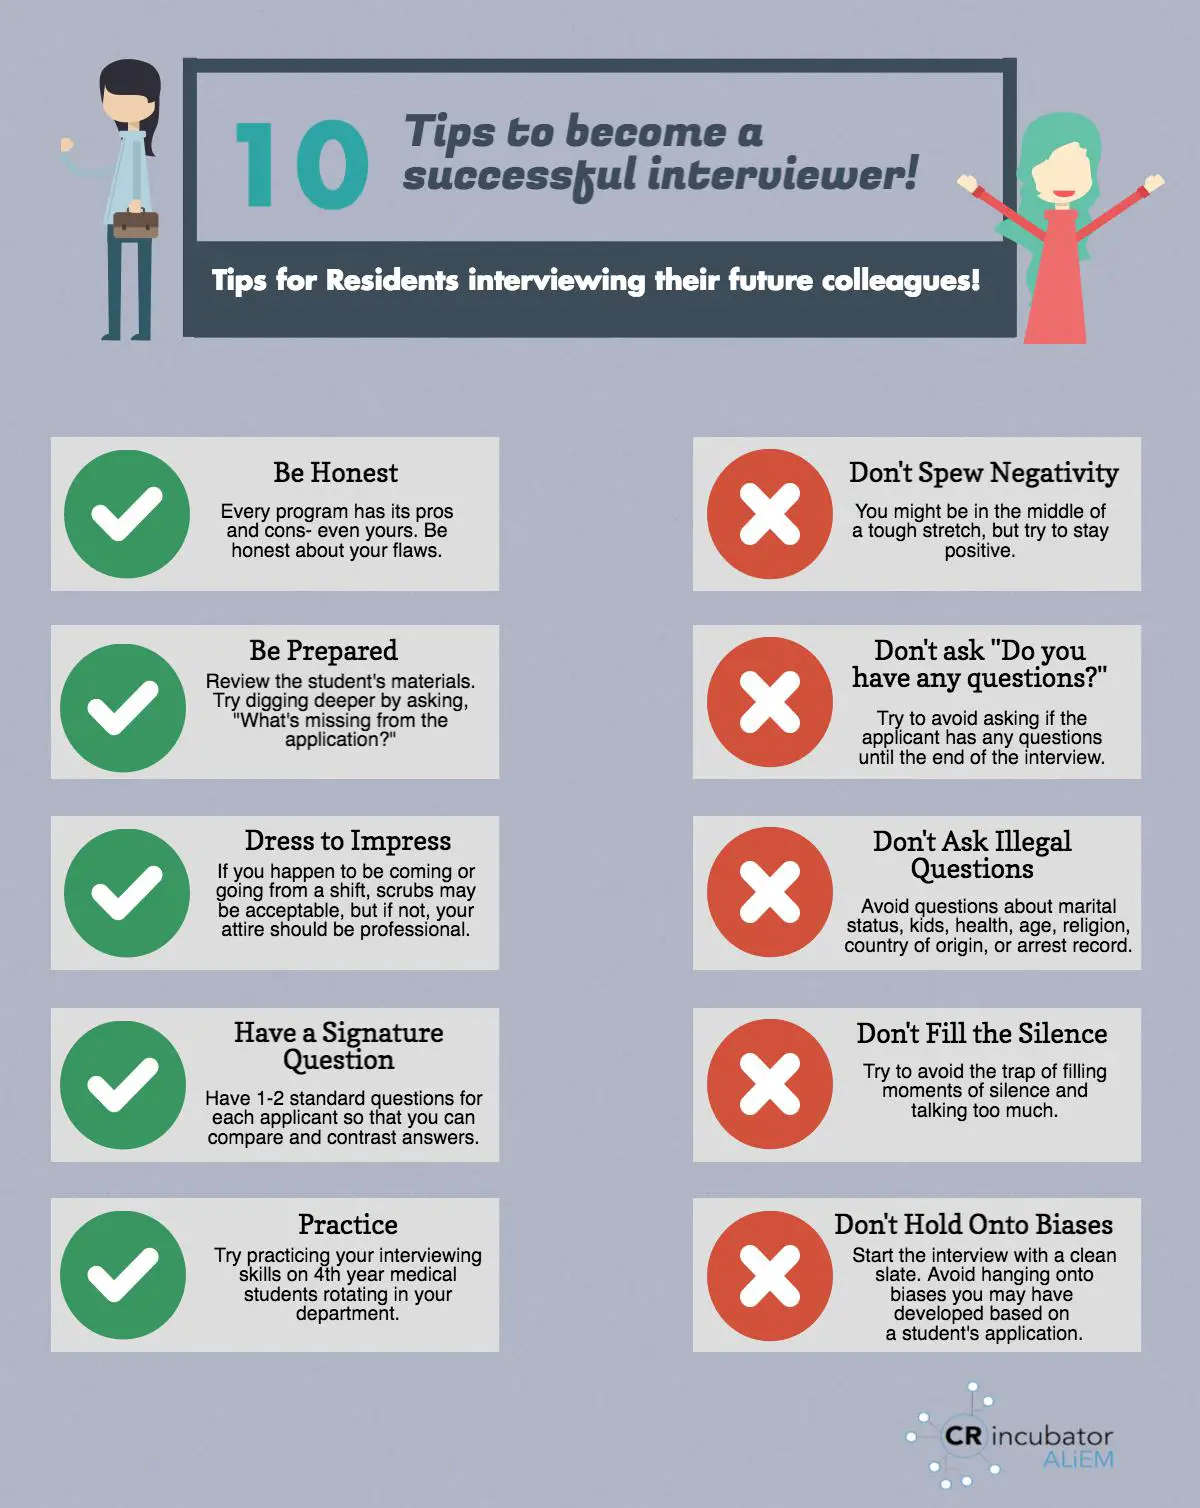 10 Tips to Become a Successful Interviewer: Do